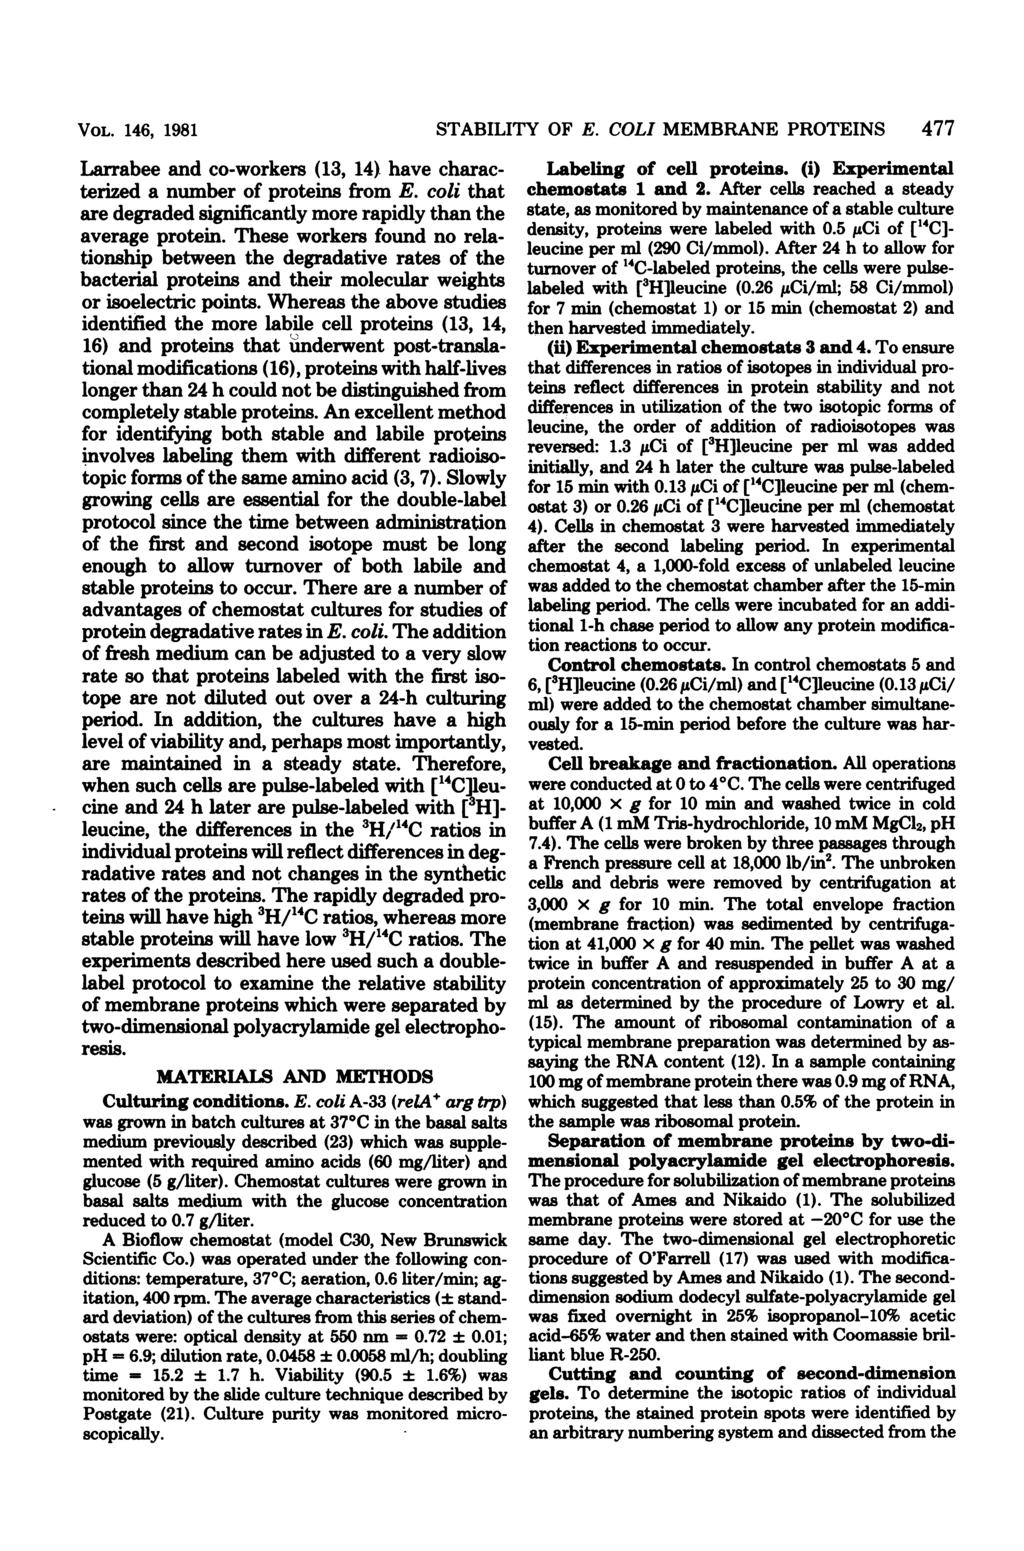 VOL. 146, 1981 Larrabee and co-workers (13, 14) have characterized a number of proteins from E. coli that are degraded significantly more rapidly than the average protein.